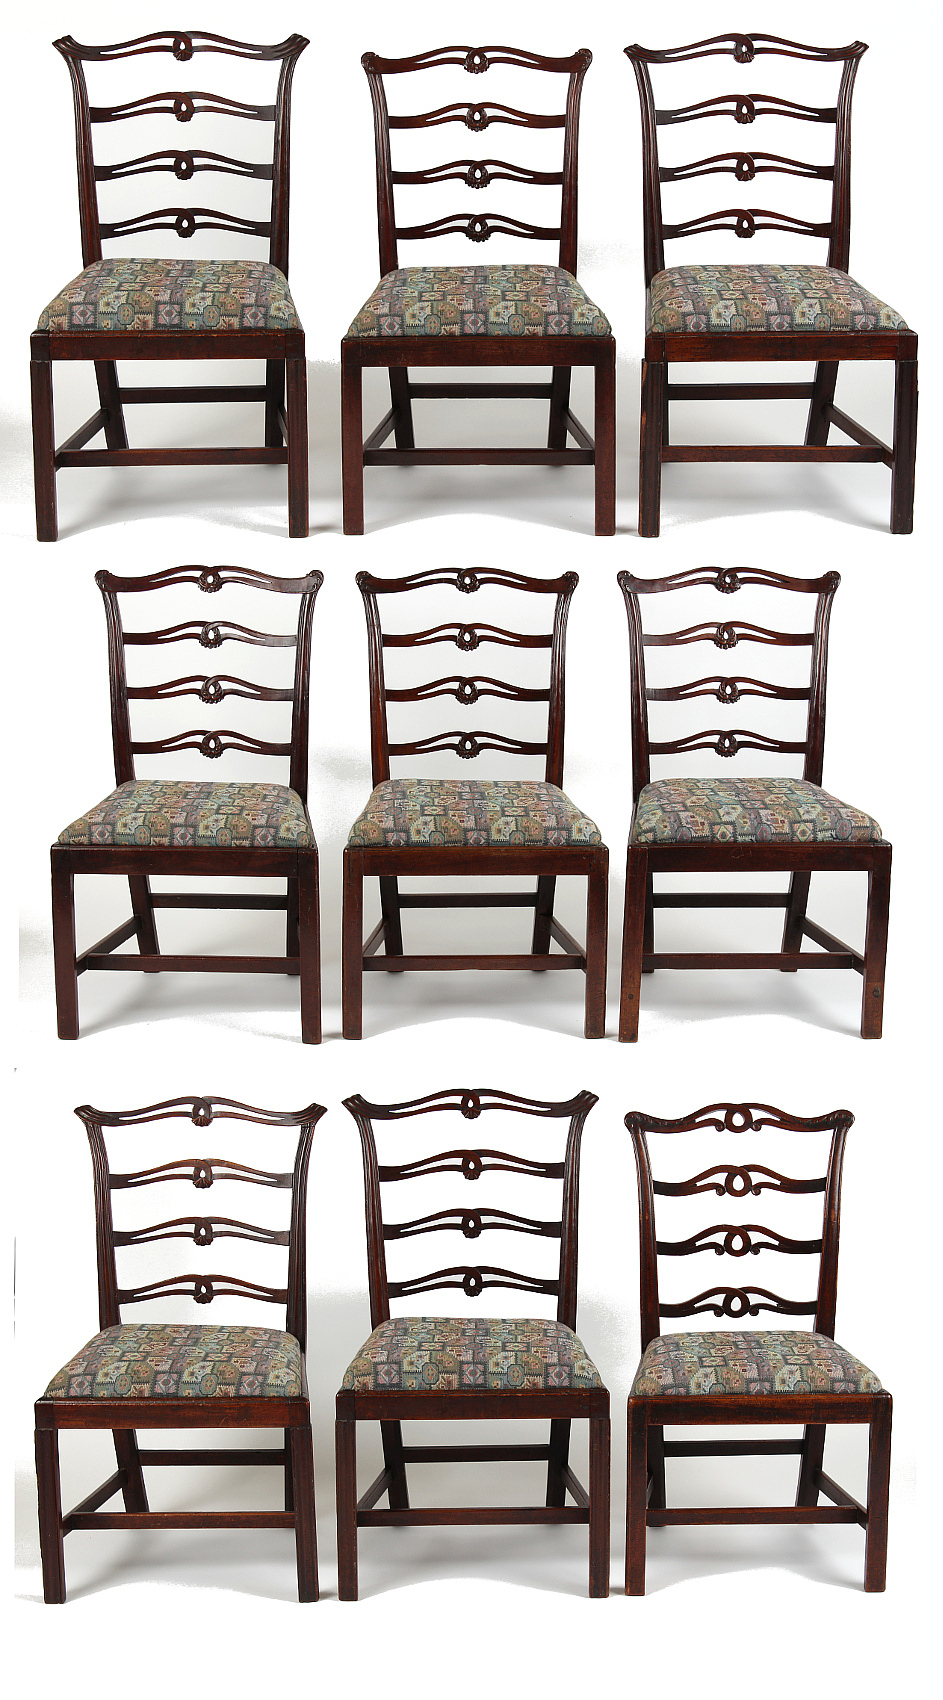 Property of a gentleman - a matched set of nine (4,4,1) George III mahogany dining chairs in the